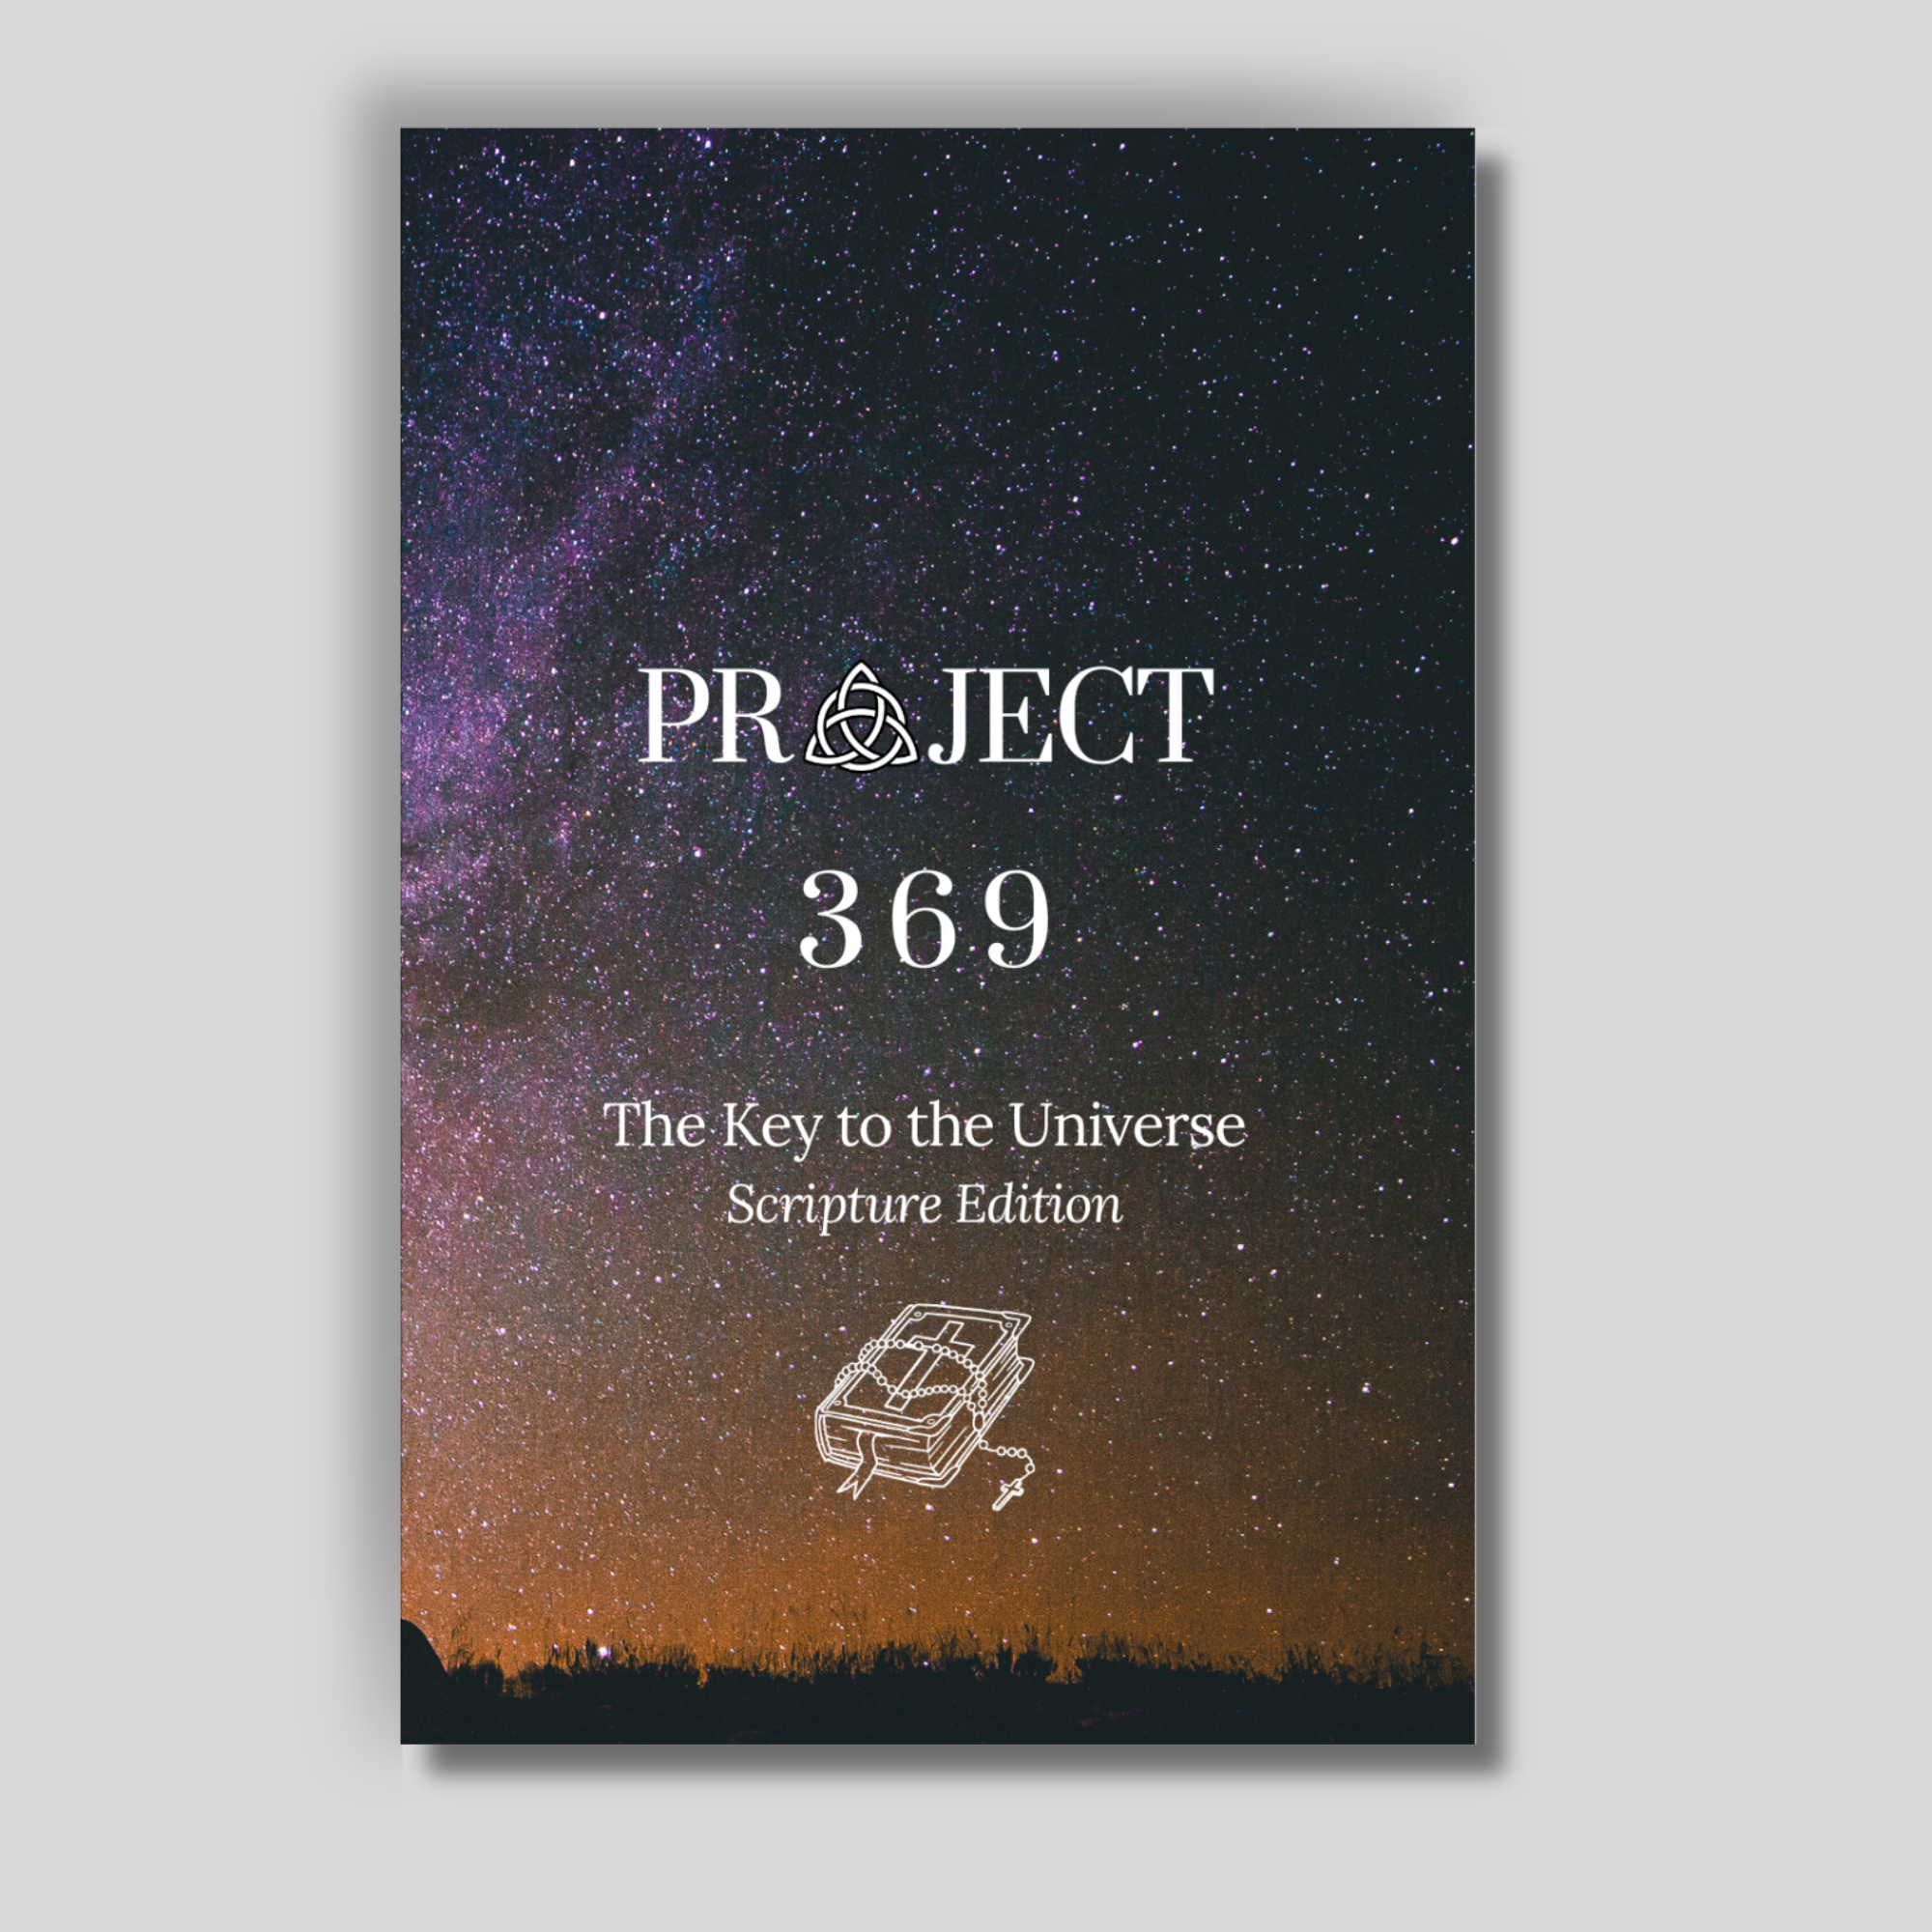 Project 369 - The Key to the Universe: Scripture Edition